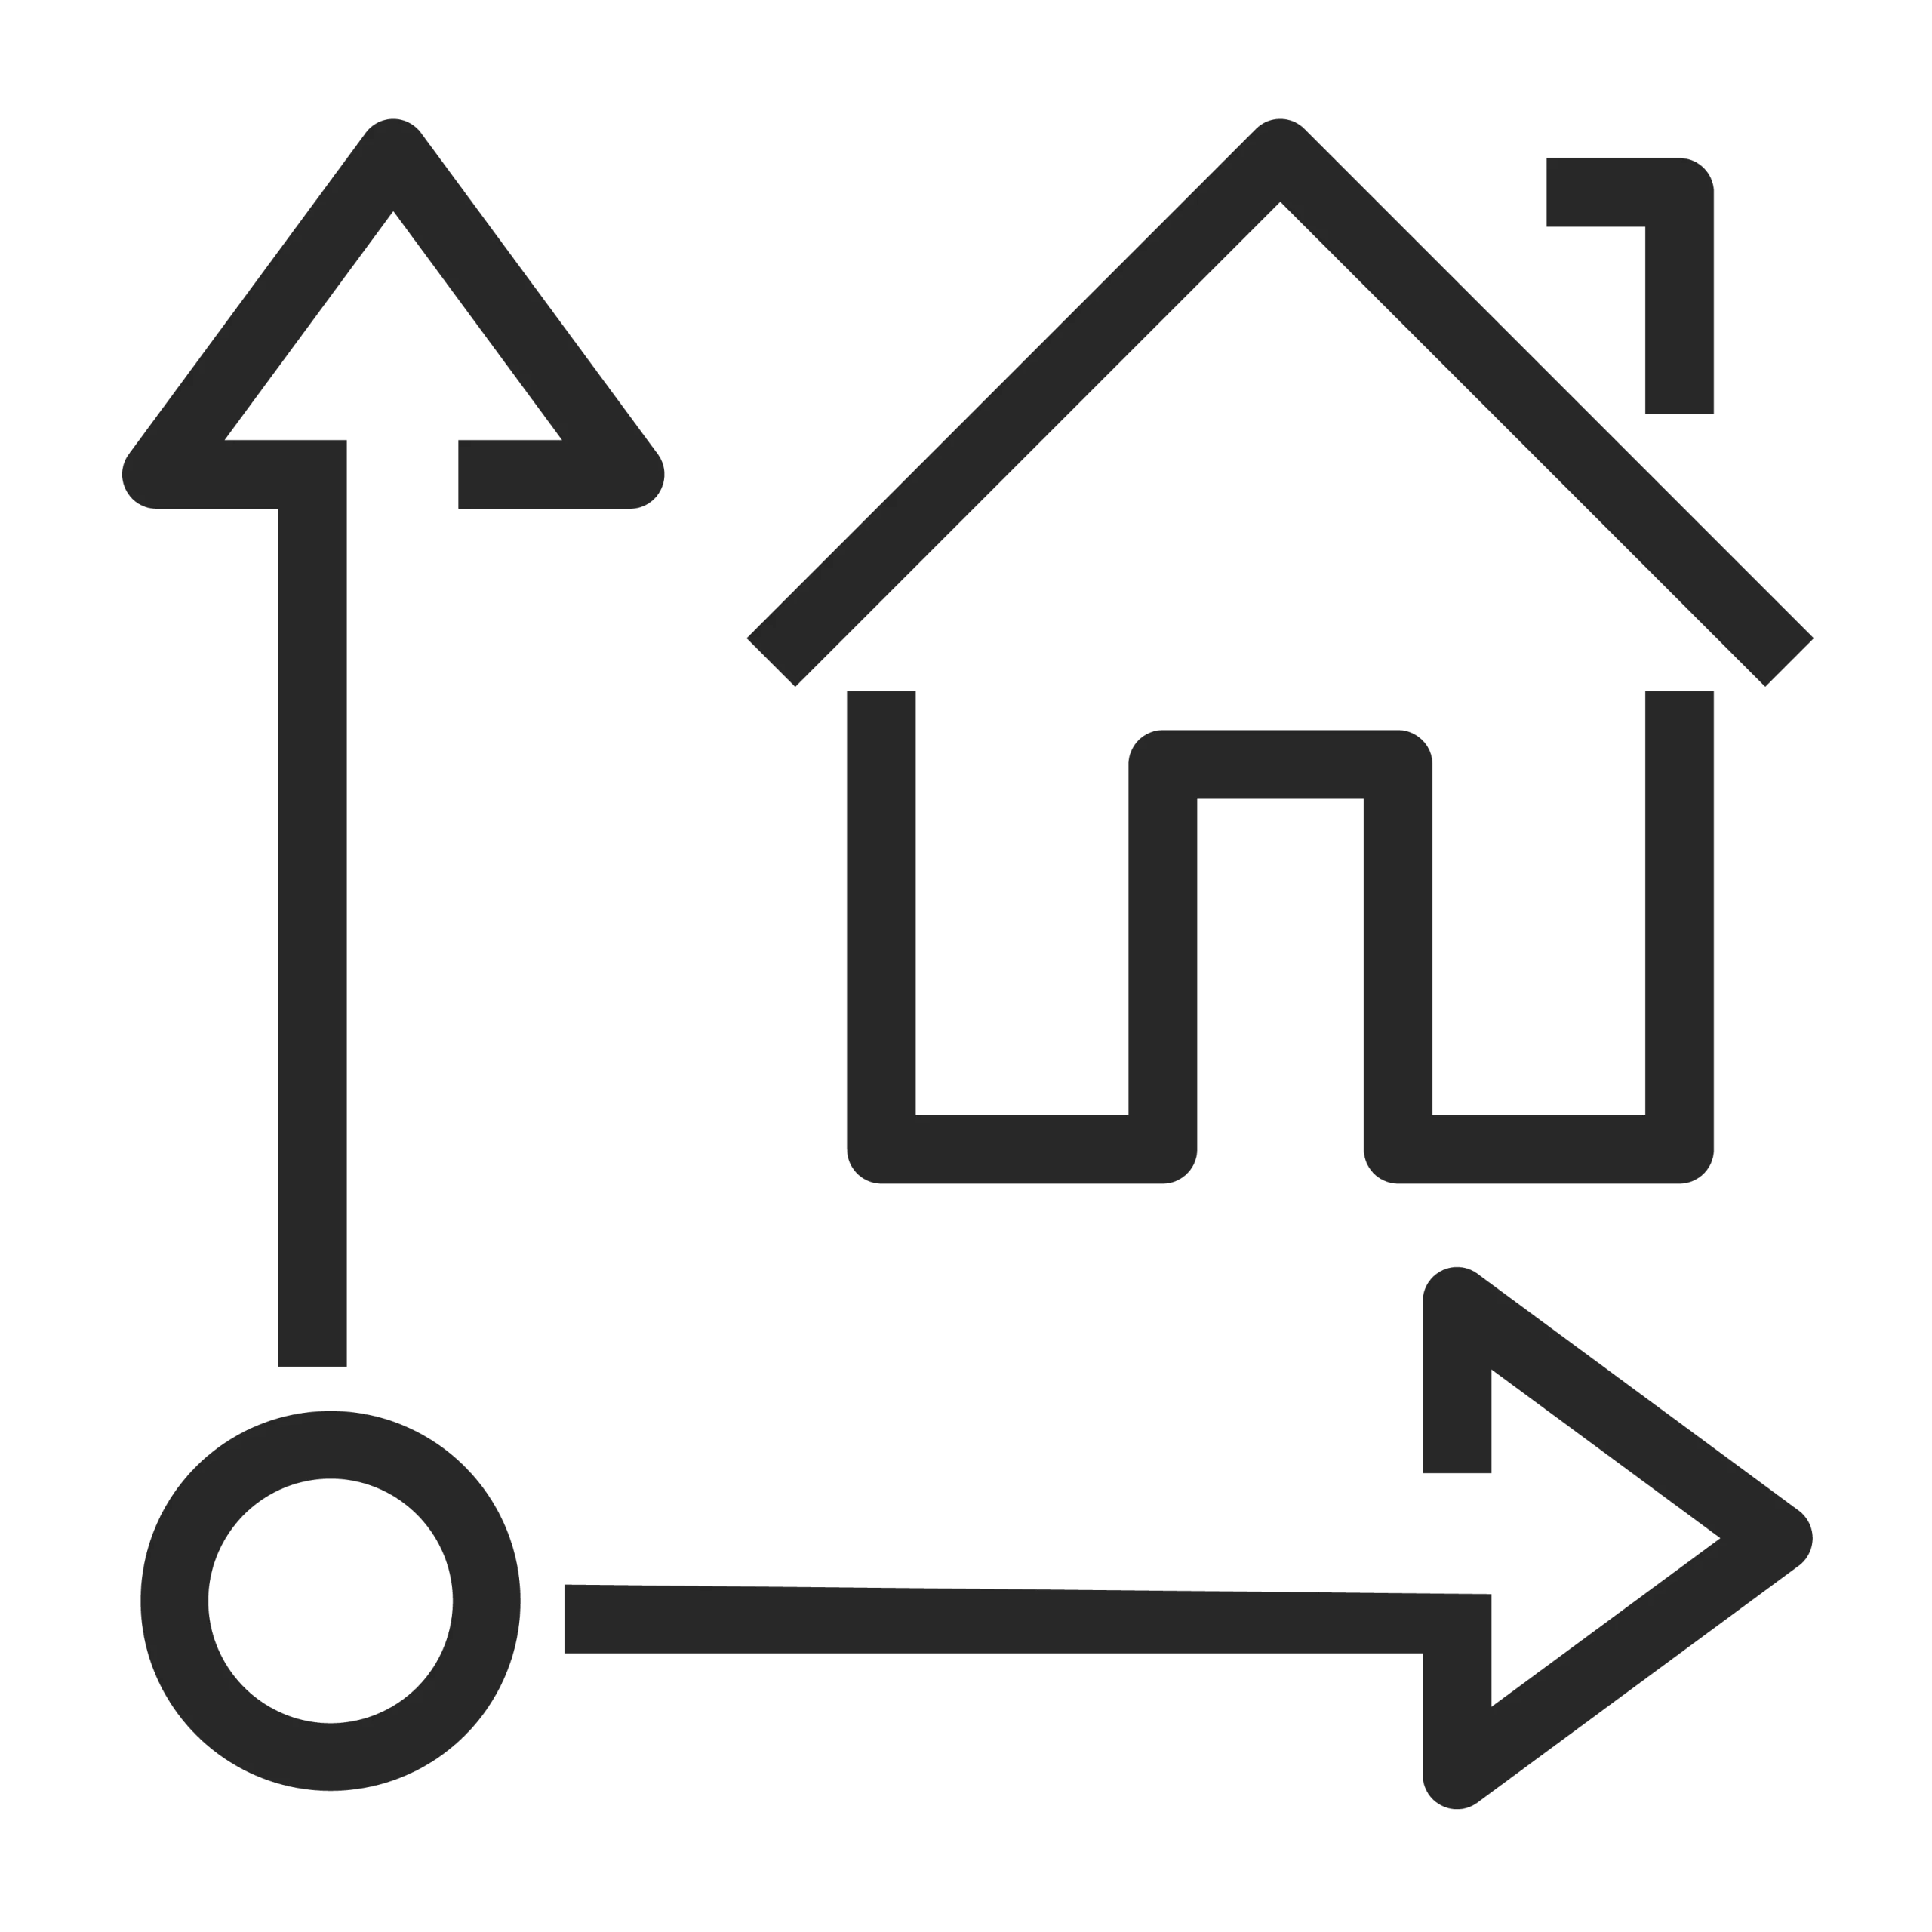 Black icon of a house with an arrow pointing up and an arrow pointing right, originating from a circle, symbolizing innovative home remodeling services.